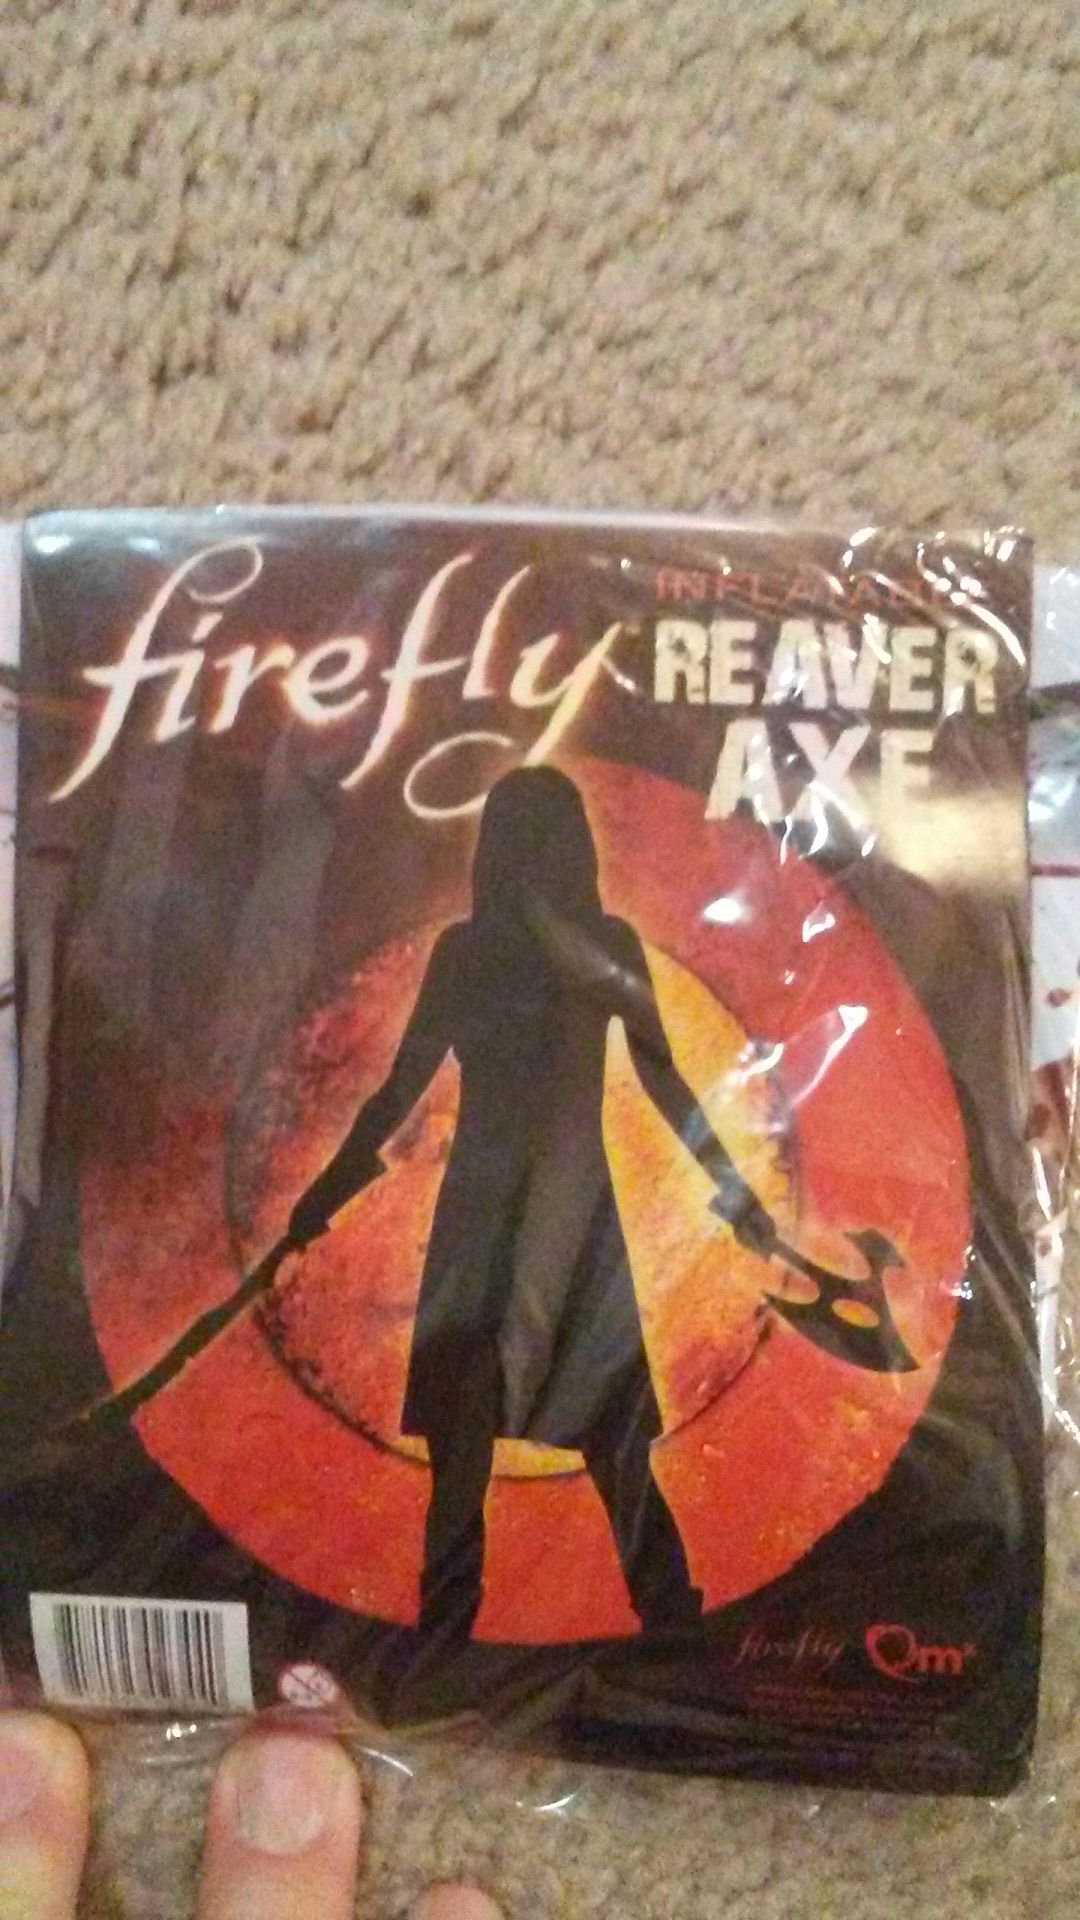 Firefly inflatable axe